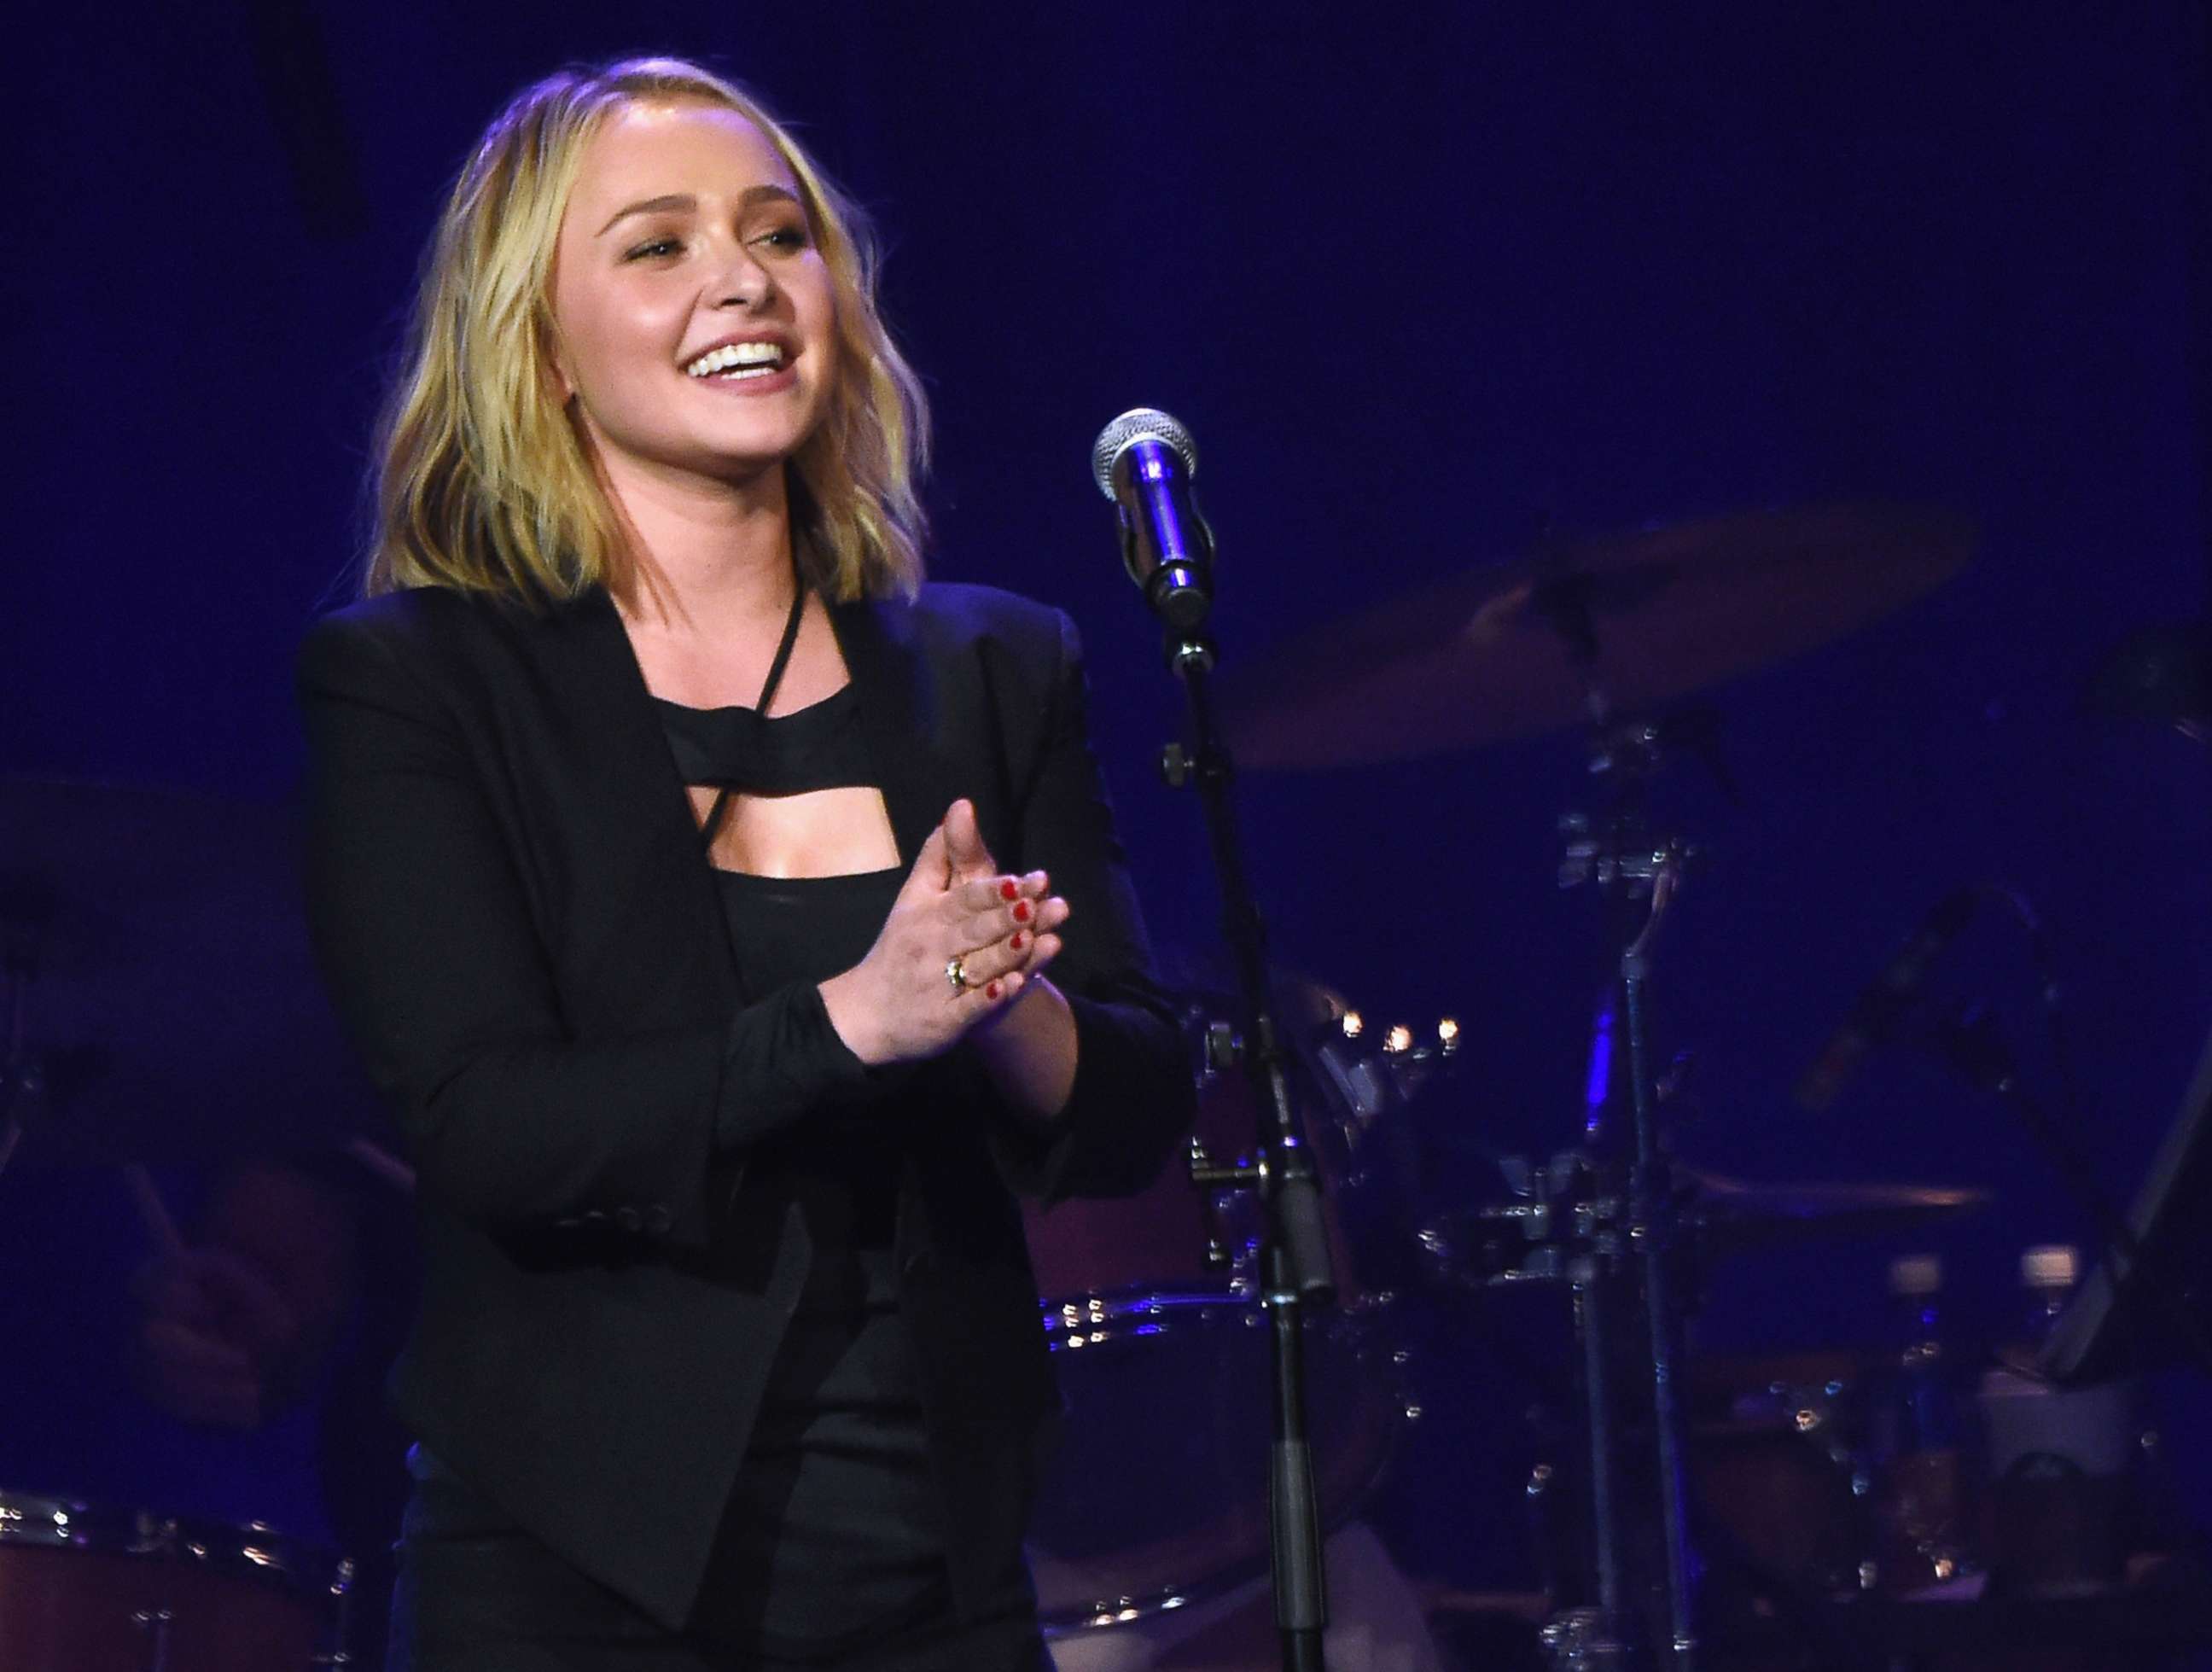 PHOTO: Hayden Panettiere performs during "Nashville for Africa" a Benefit for the African Childrens Choir in Nashville, Tenn., Feb. 15, 2016.